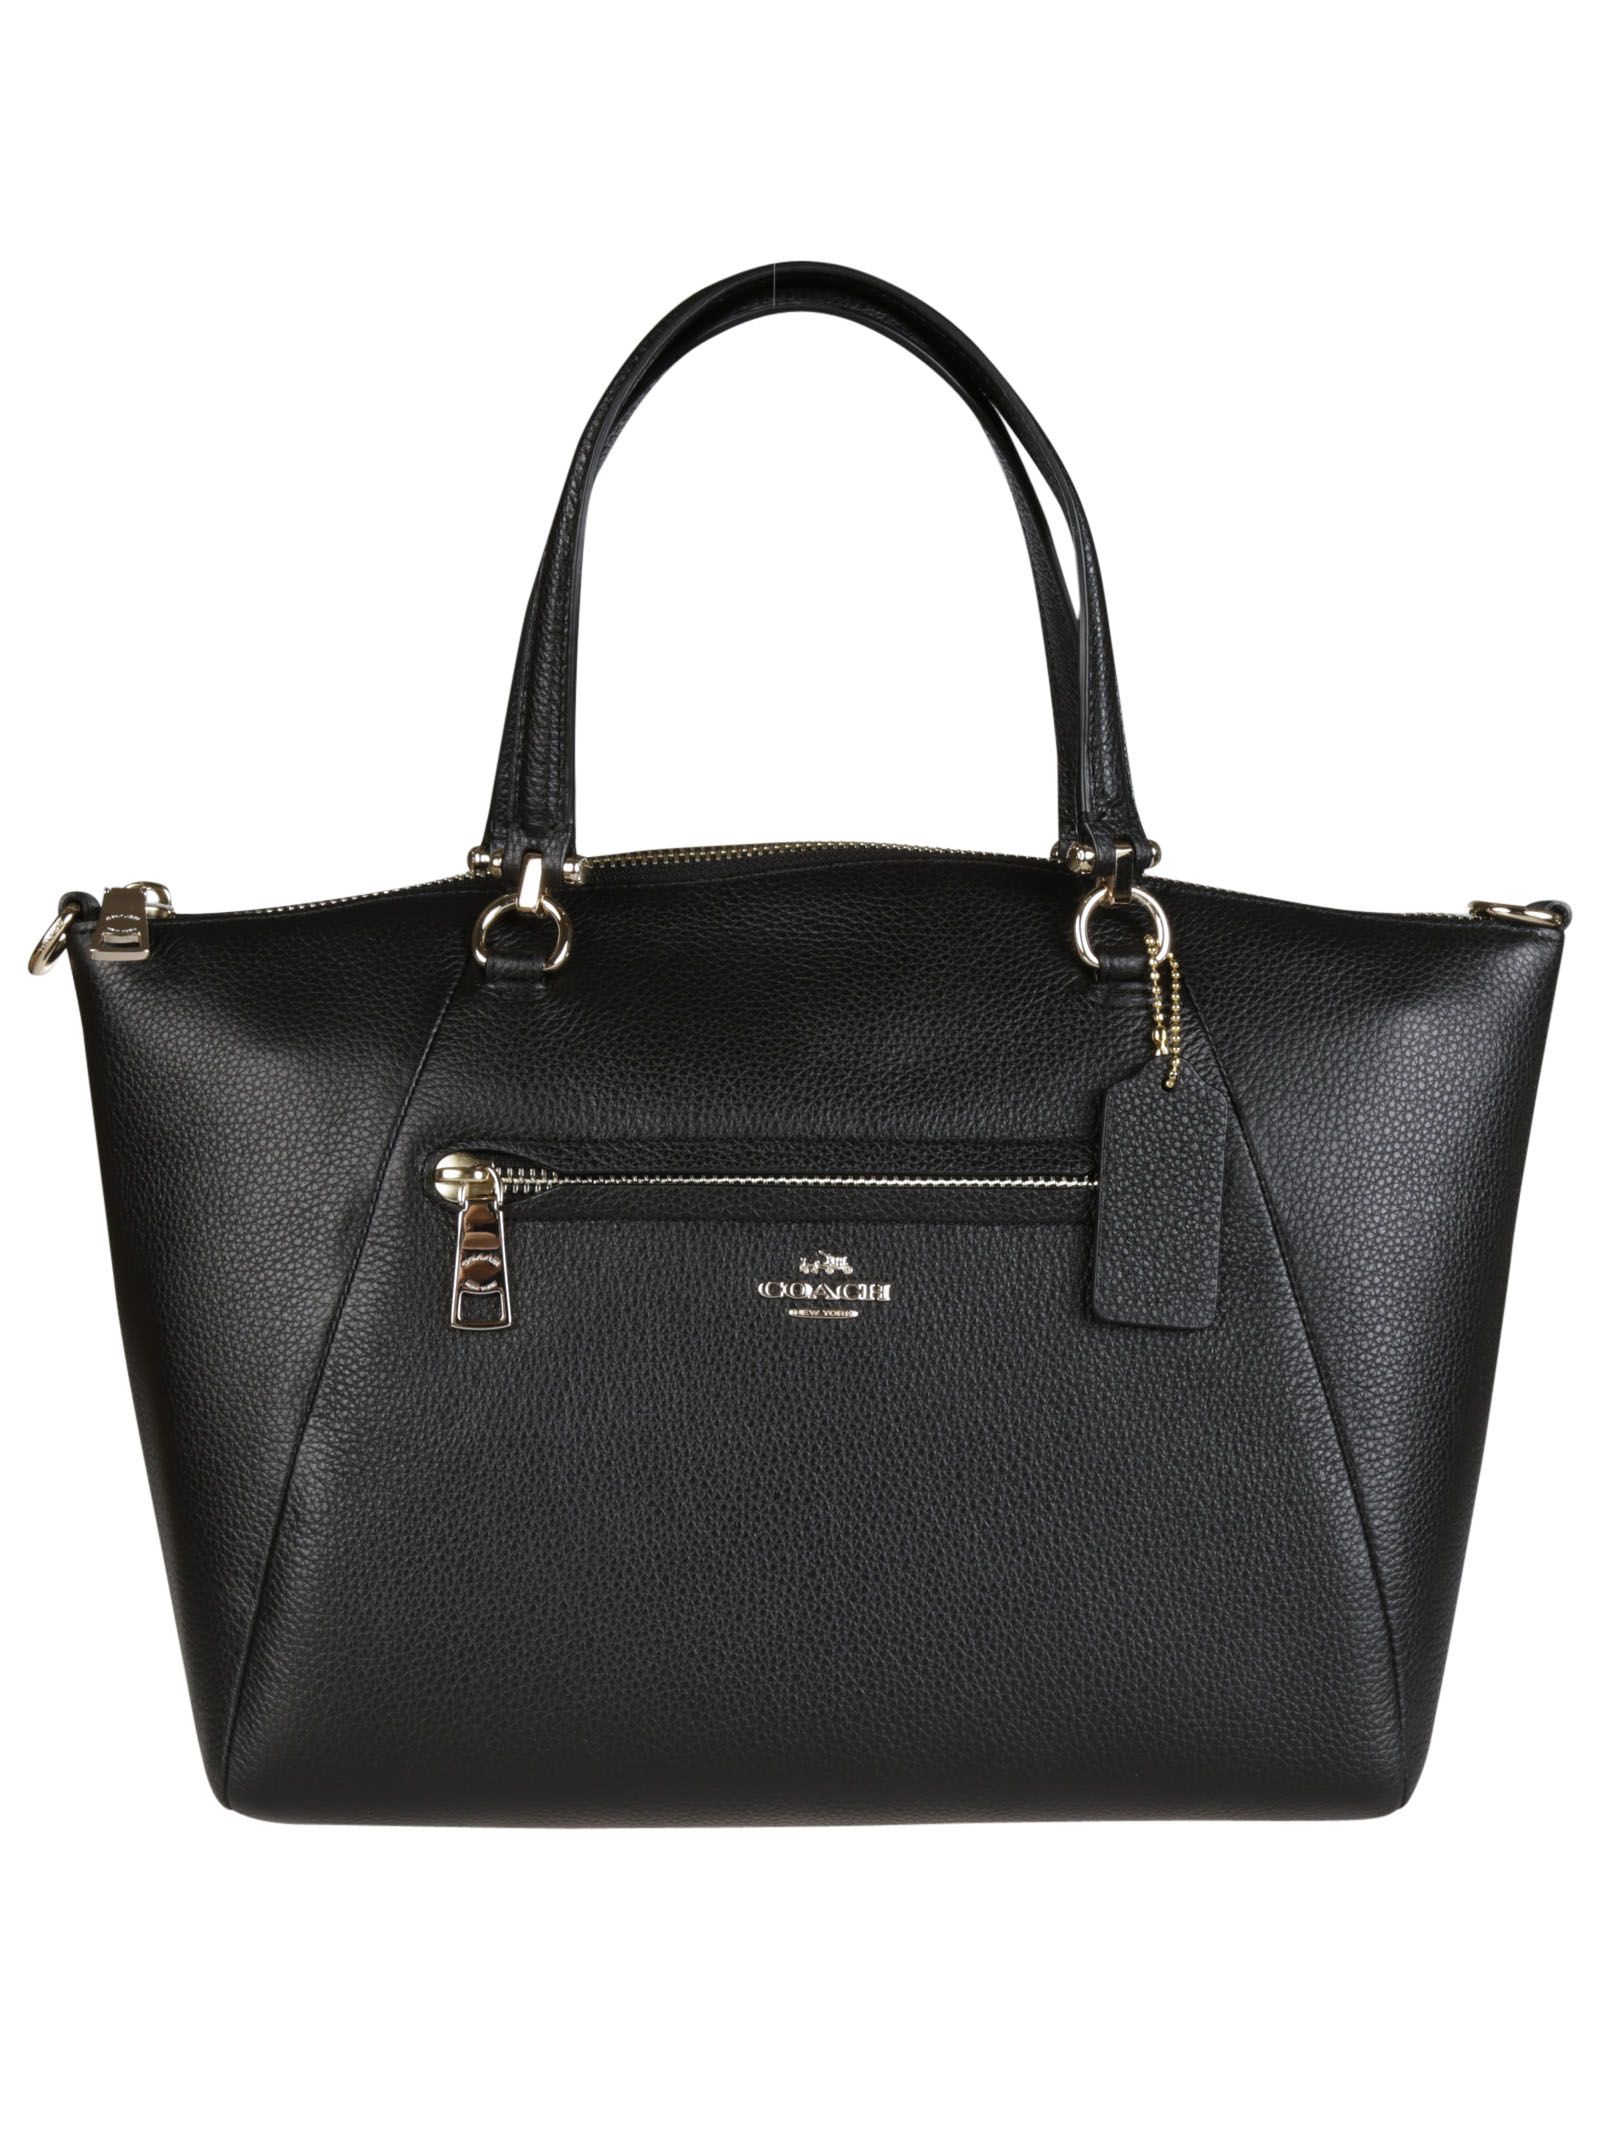 Coach Leather Tote Bags For Women | Literacy Ontario Central South